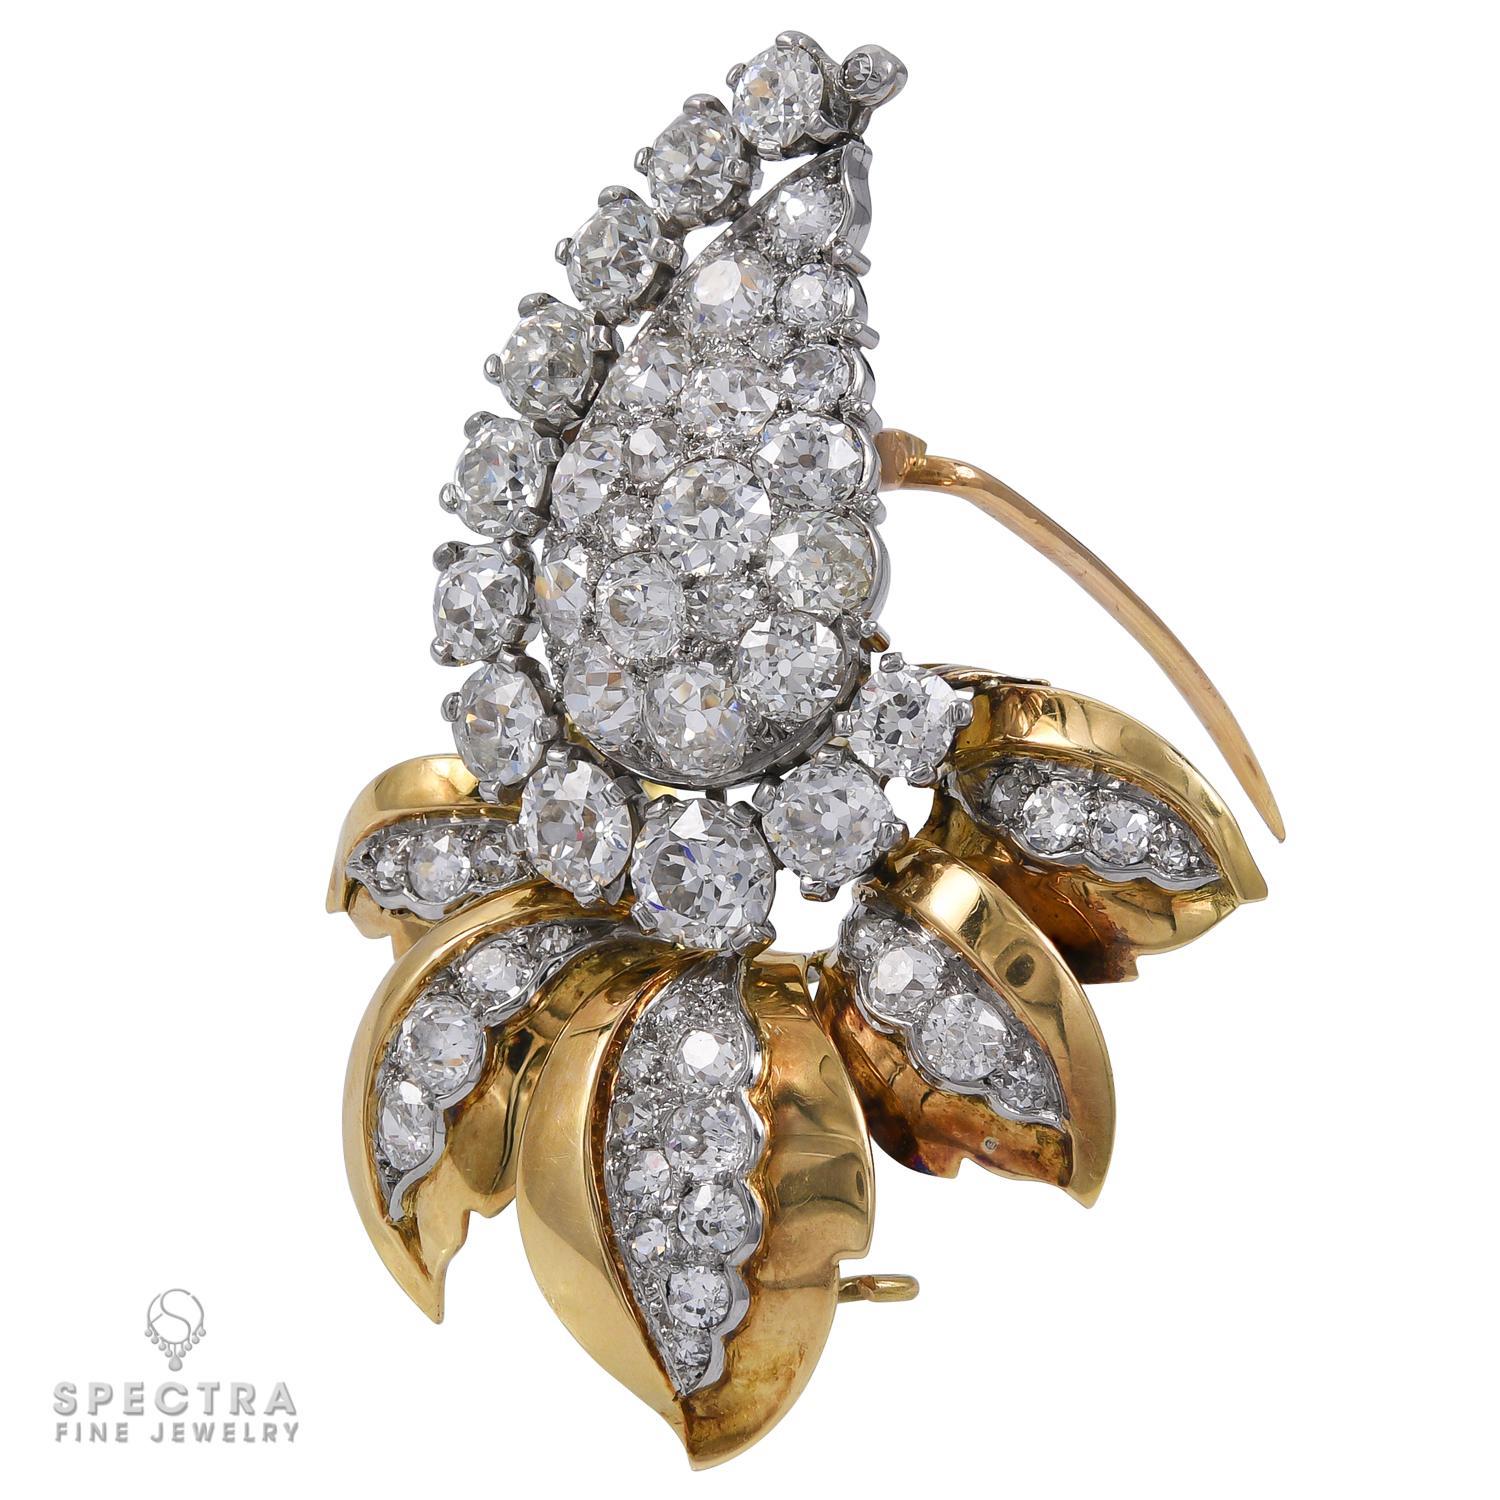 Crafted in 1948 by Charles Jacqueau for Cartier, the exquisite 'Bud & Leaves' brooch is a testament to timeless elegance. Encrusted with diamonds and set in 18k yellow gold, its intricate design captivates the eye. Versatility meets sophistication